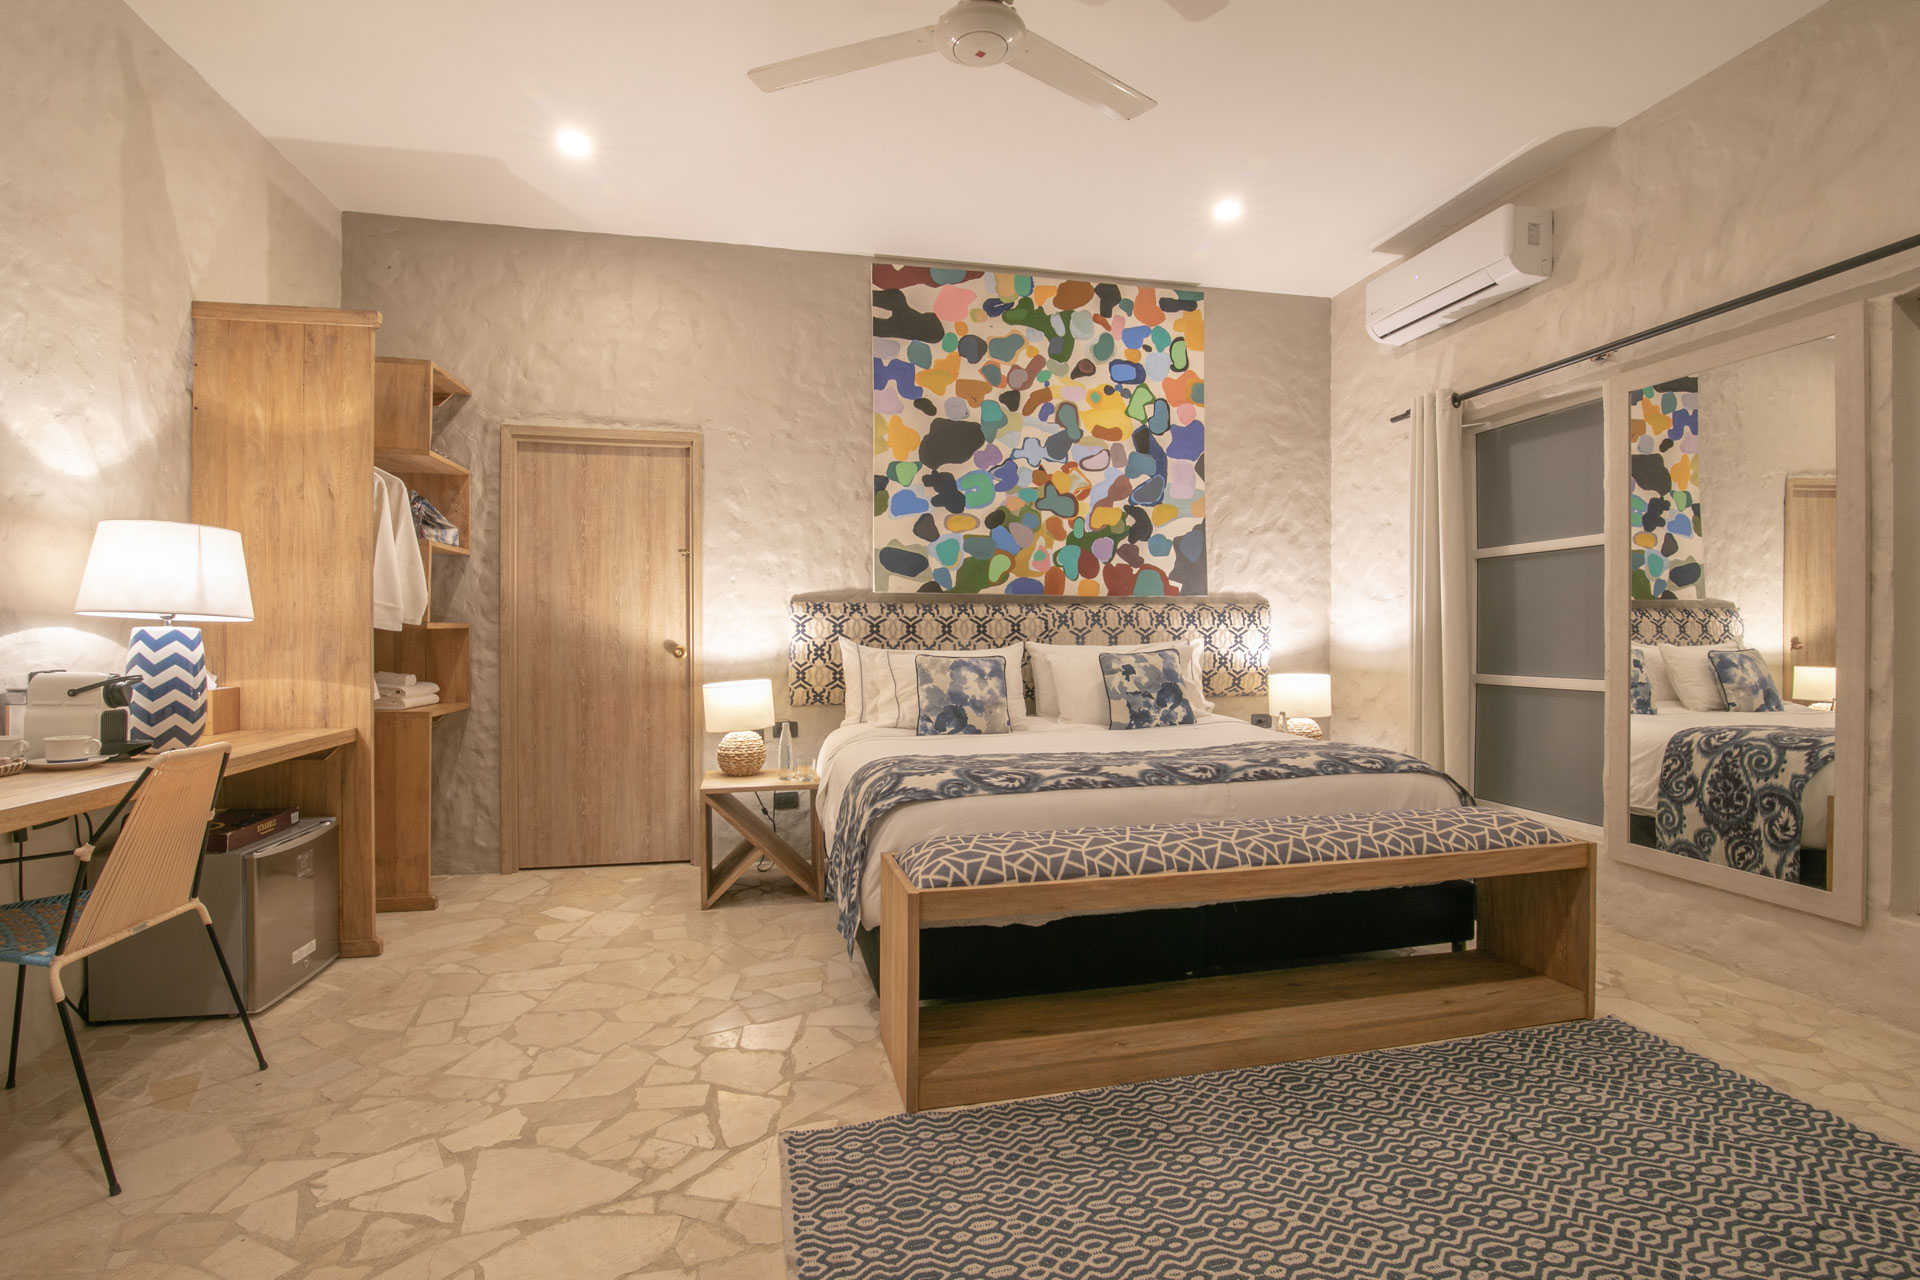 Hotel bedroom with grey accents, wooden furniture and a colourful abstract mural above the bed.